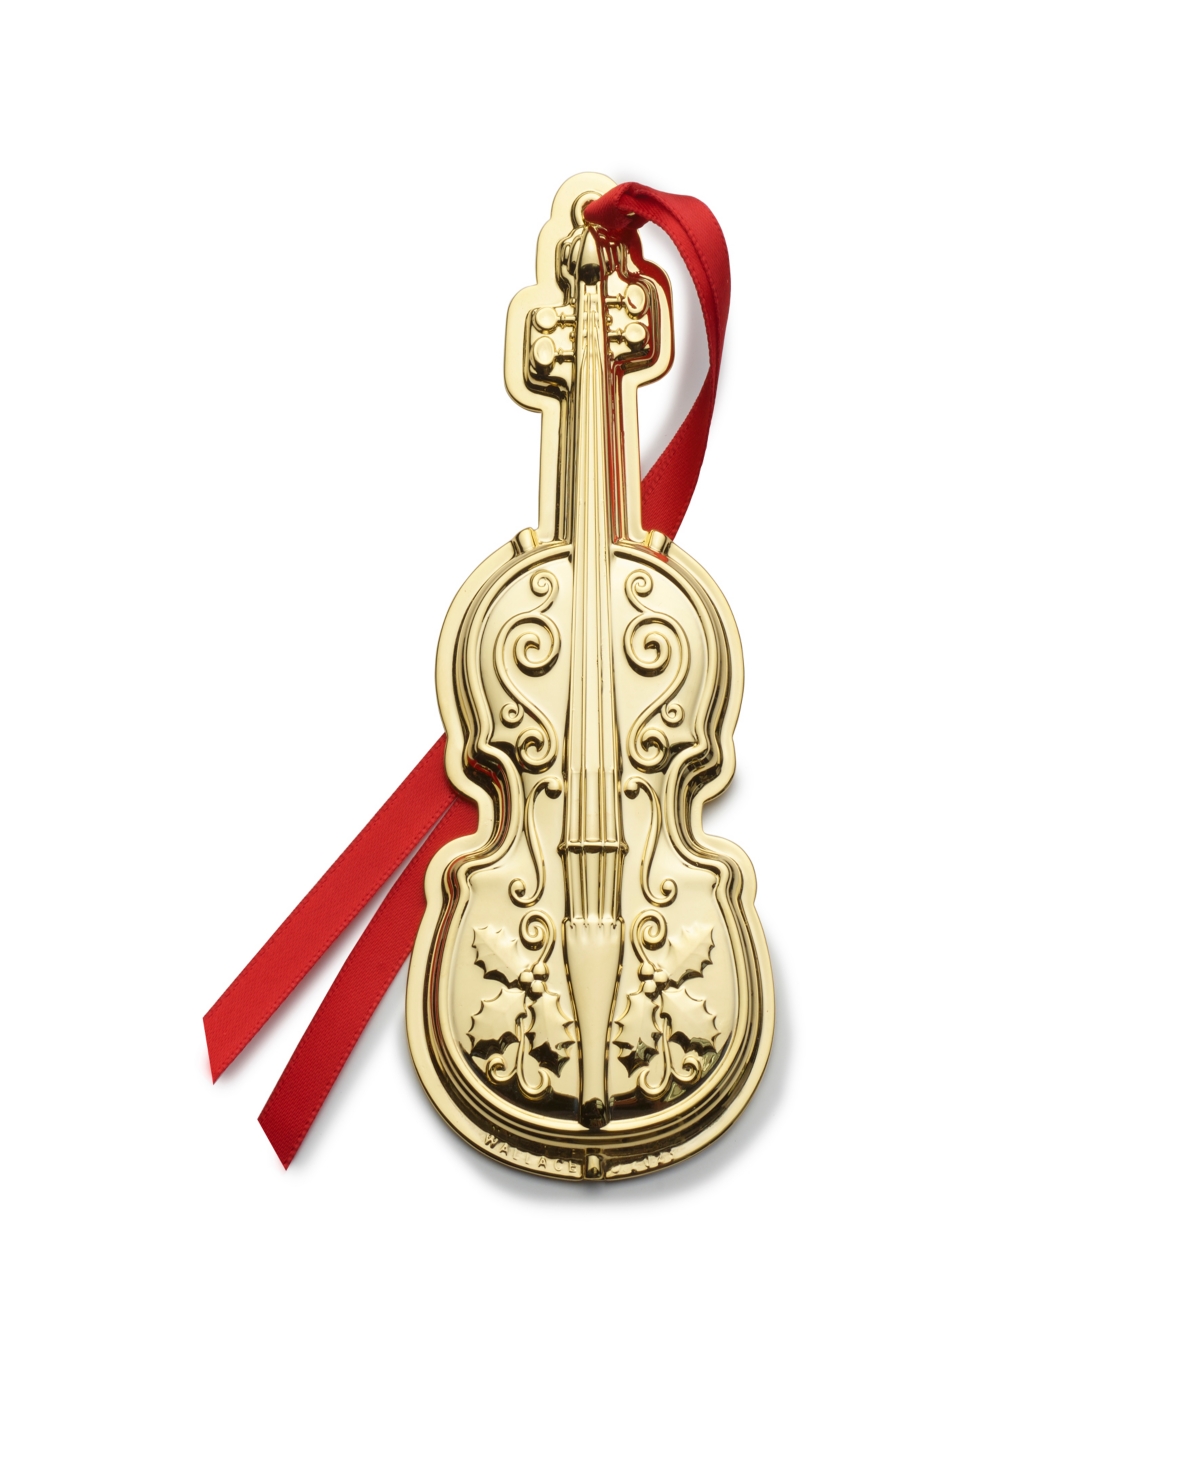 Wallace 2023 Gold Plated Violin Ornament, 2nd Edition